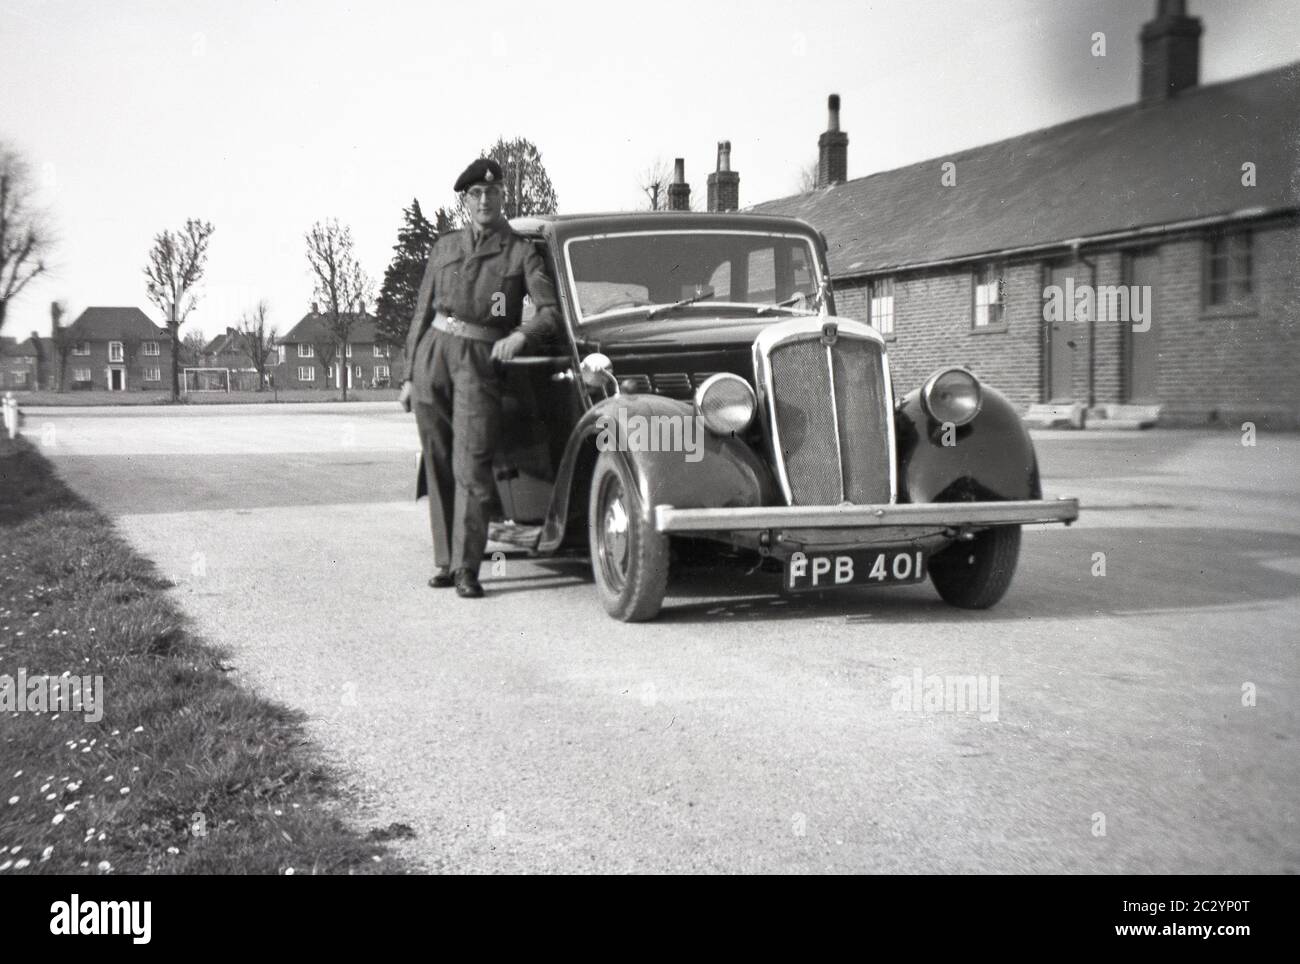 1940s, historical, a young soldier/driver in his uniform standing at an army base on a flat gravel area beside his motorcar, England, UK. The housing and accommodation of the senior Army Officers can be seen in the background. Stock Photo